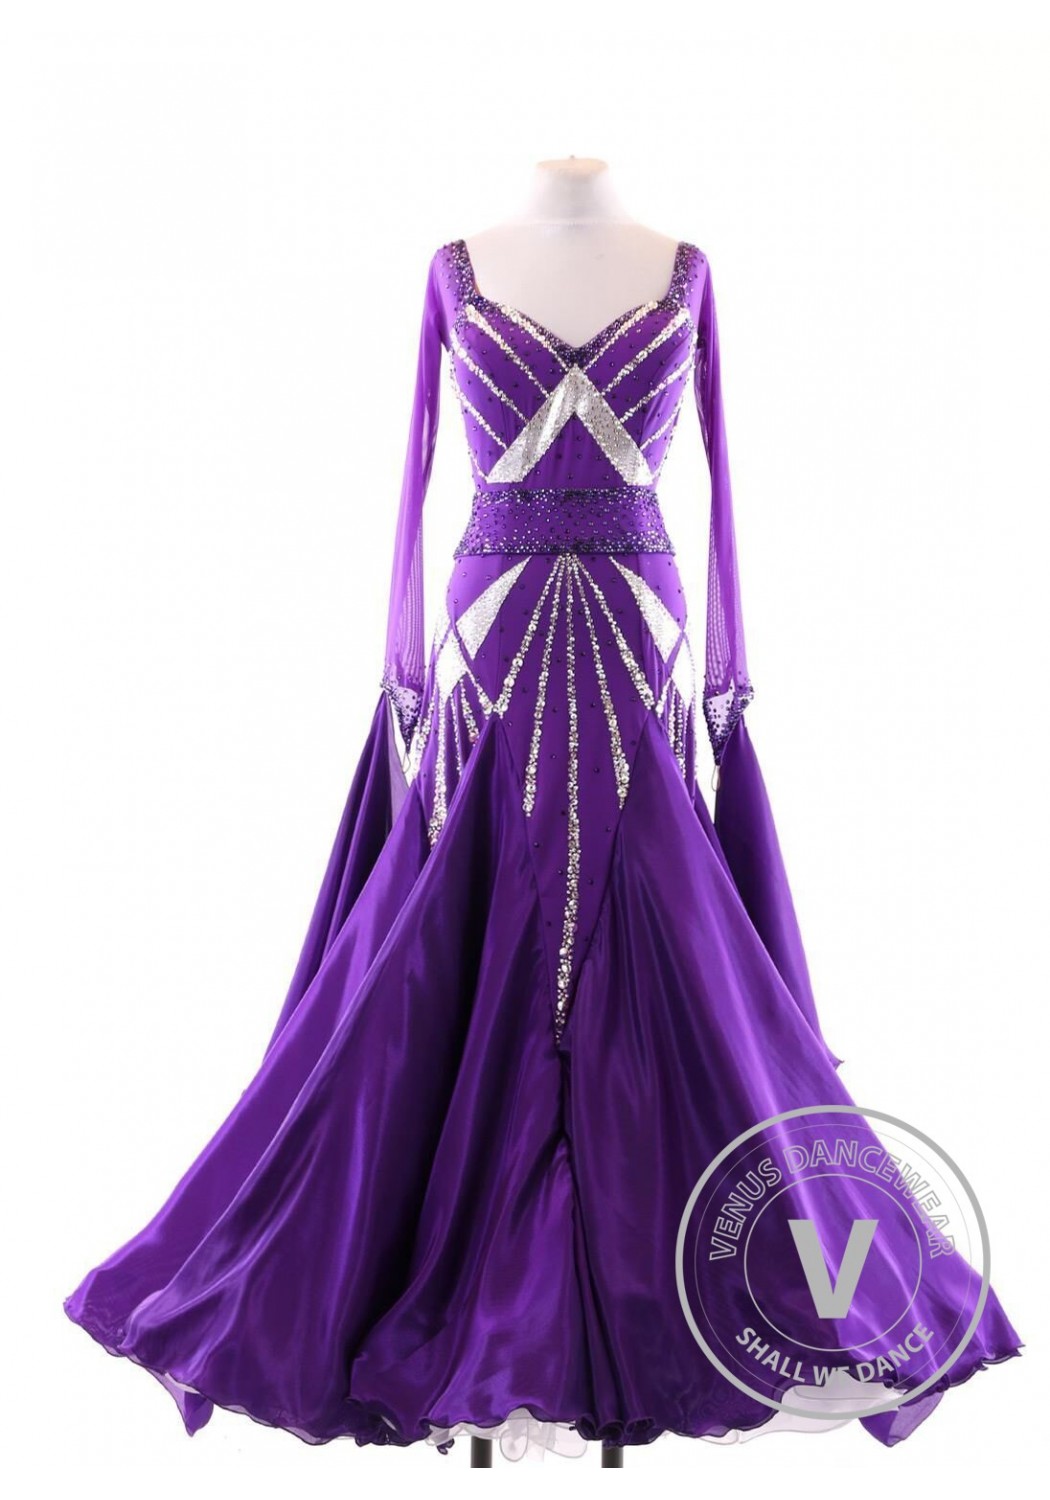 World Class Ballroom Competition Gown S119